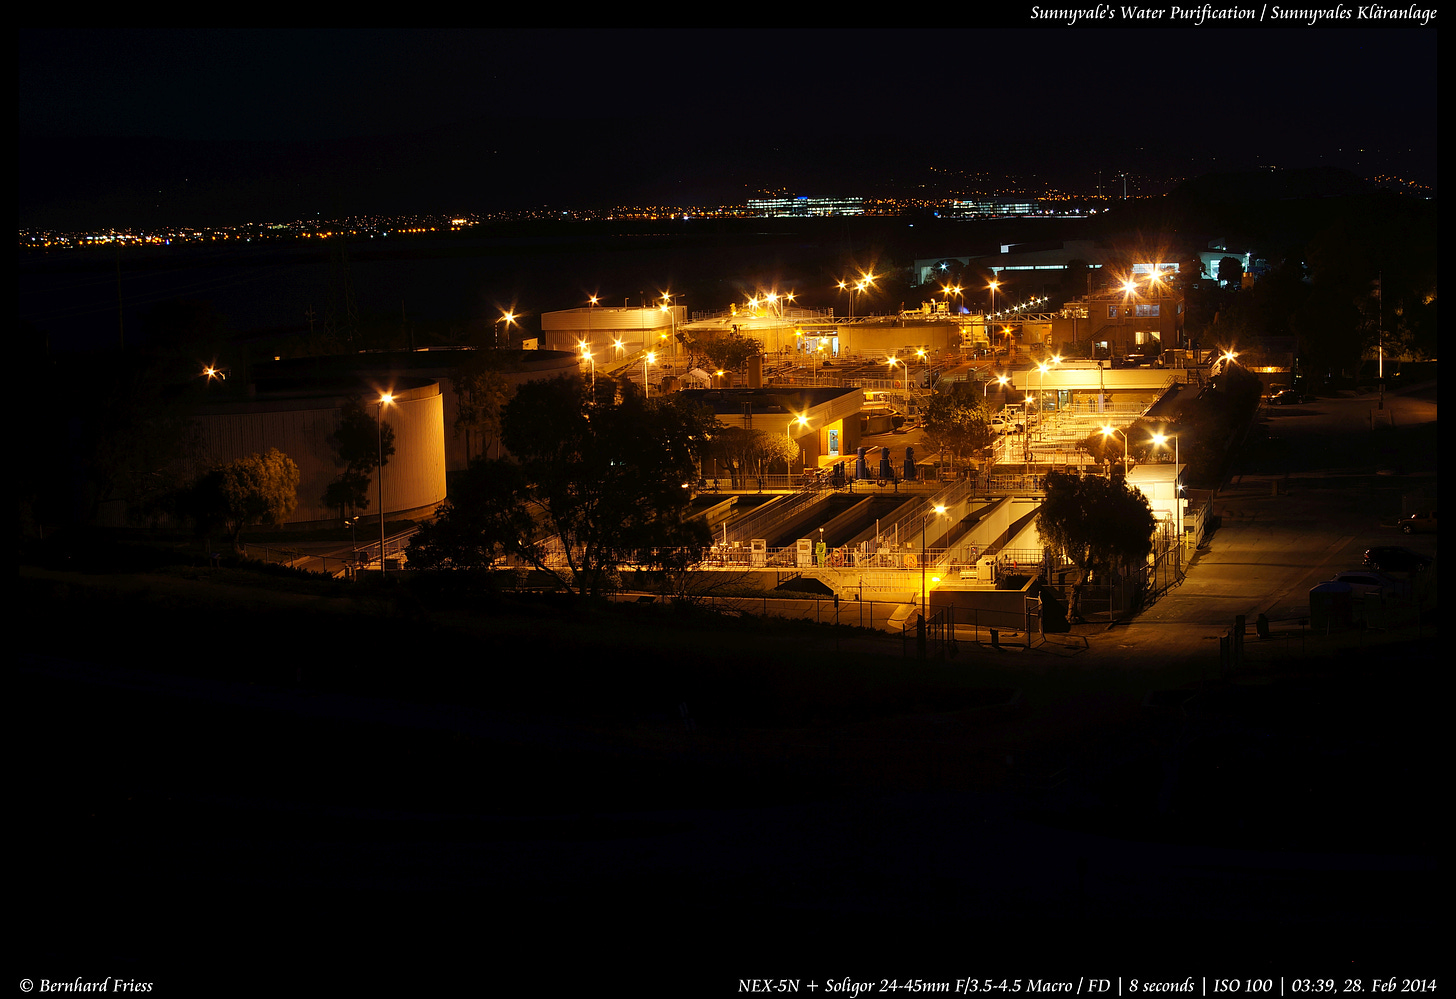 A water purification plant, at night.